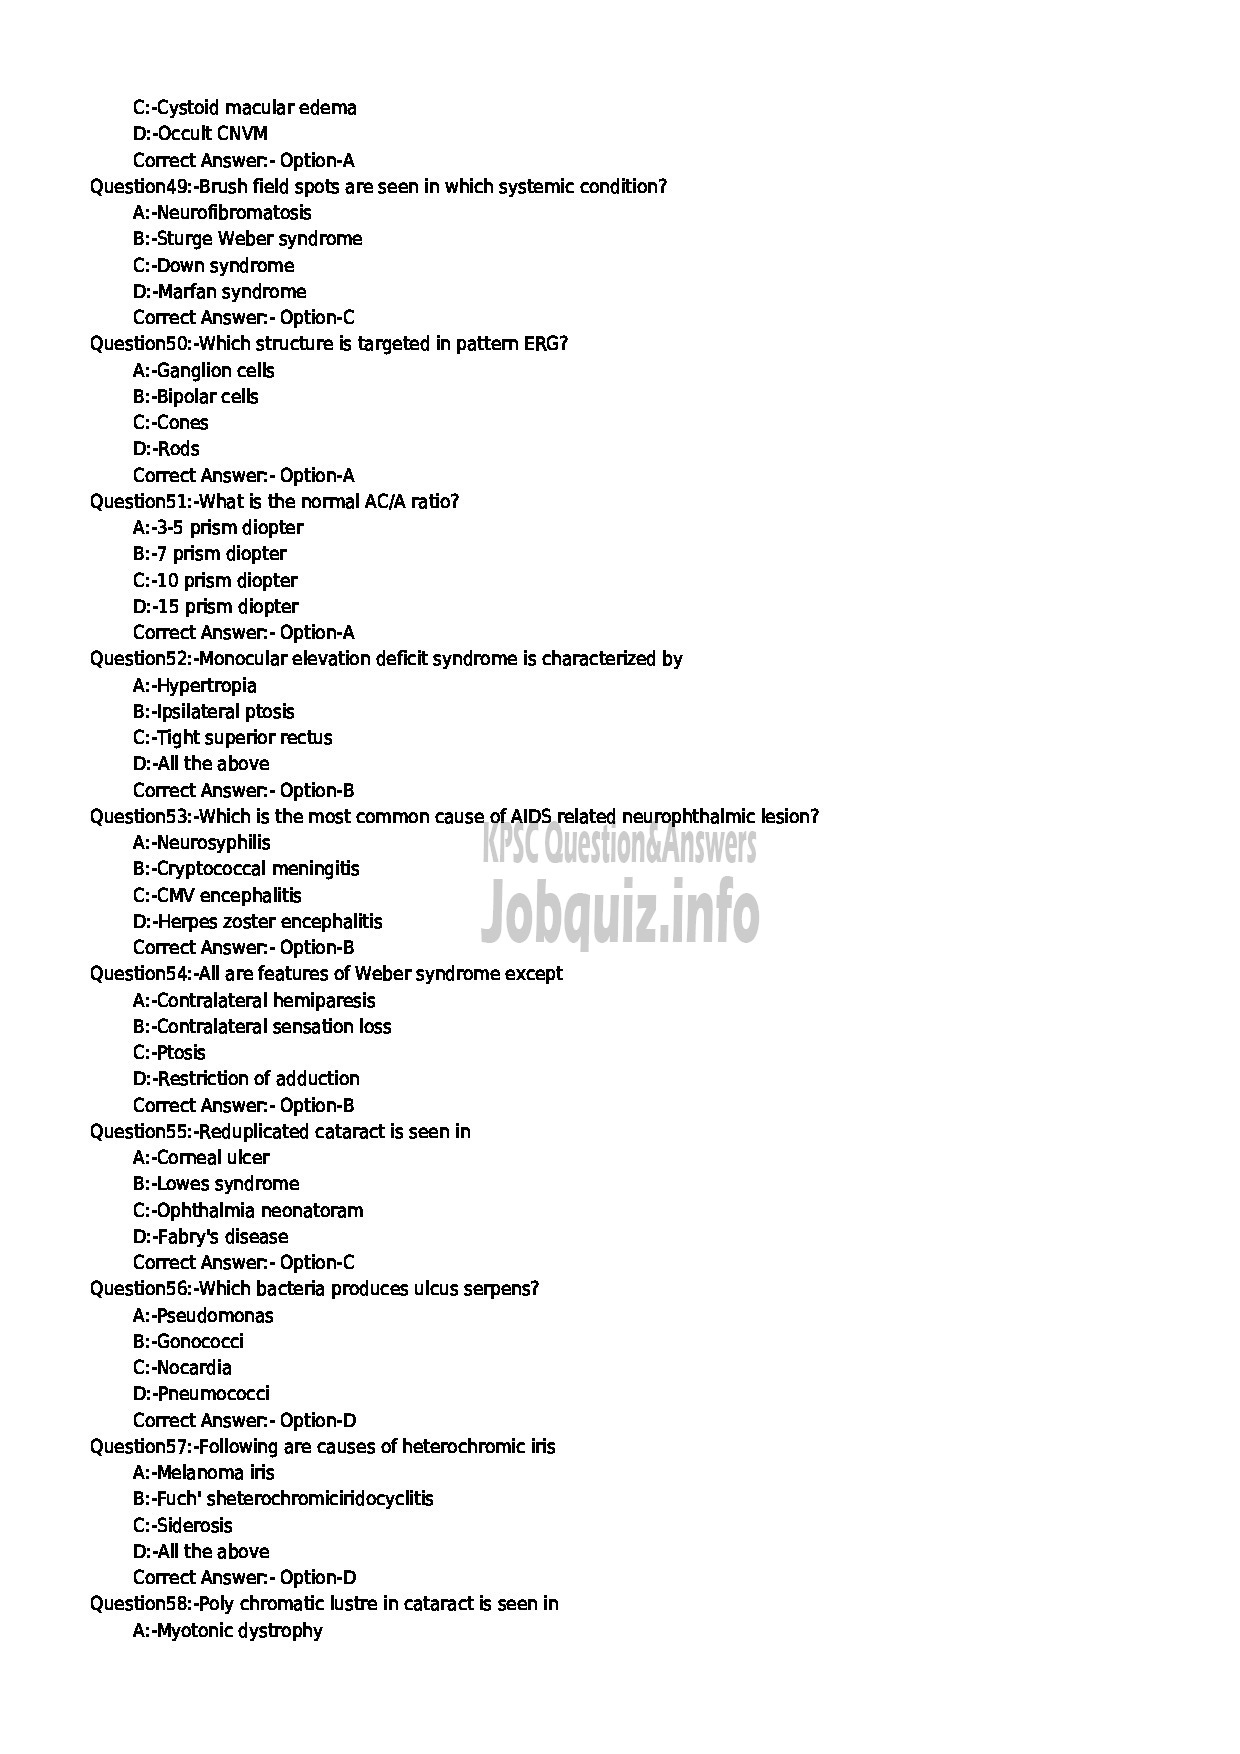 Kerala PSC Question Paper - SENIOR LECTURER IN OPTHALMOLOGY NCA MEDICAL EDUCATION-6